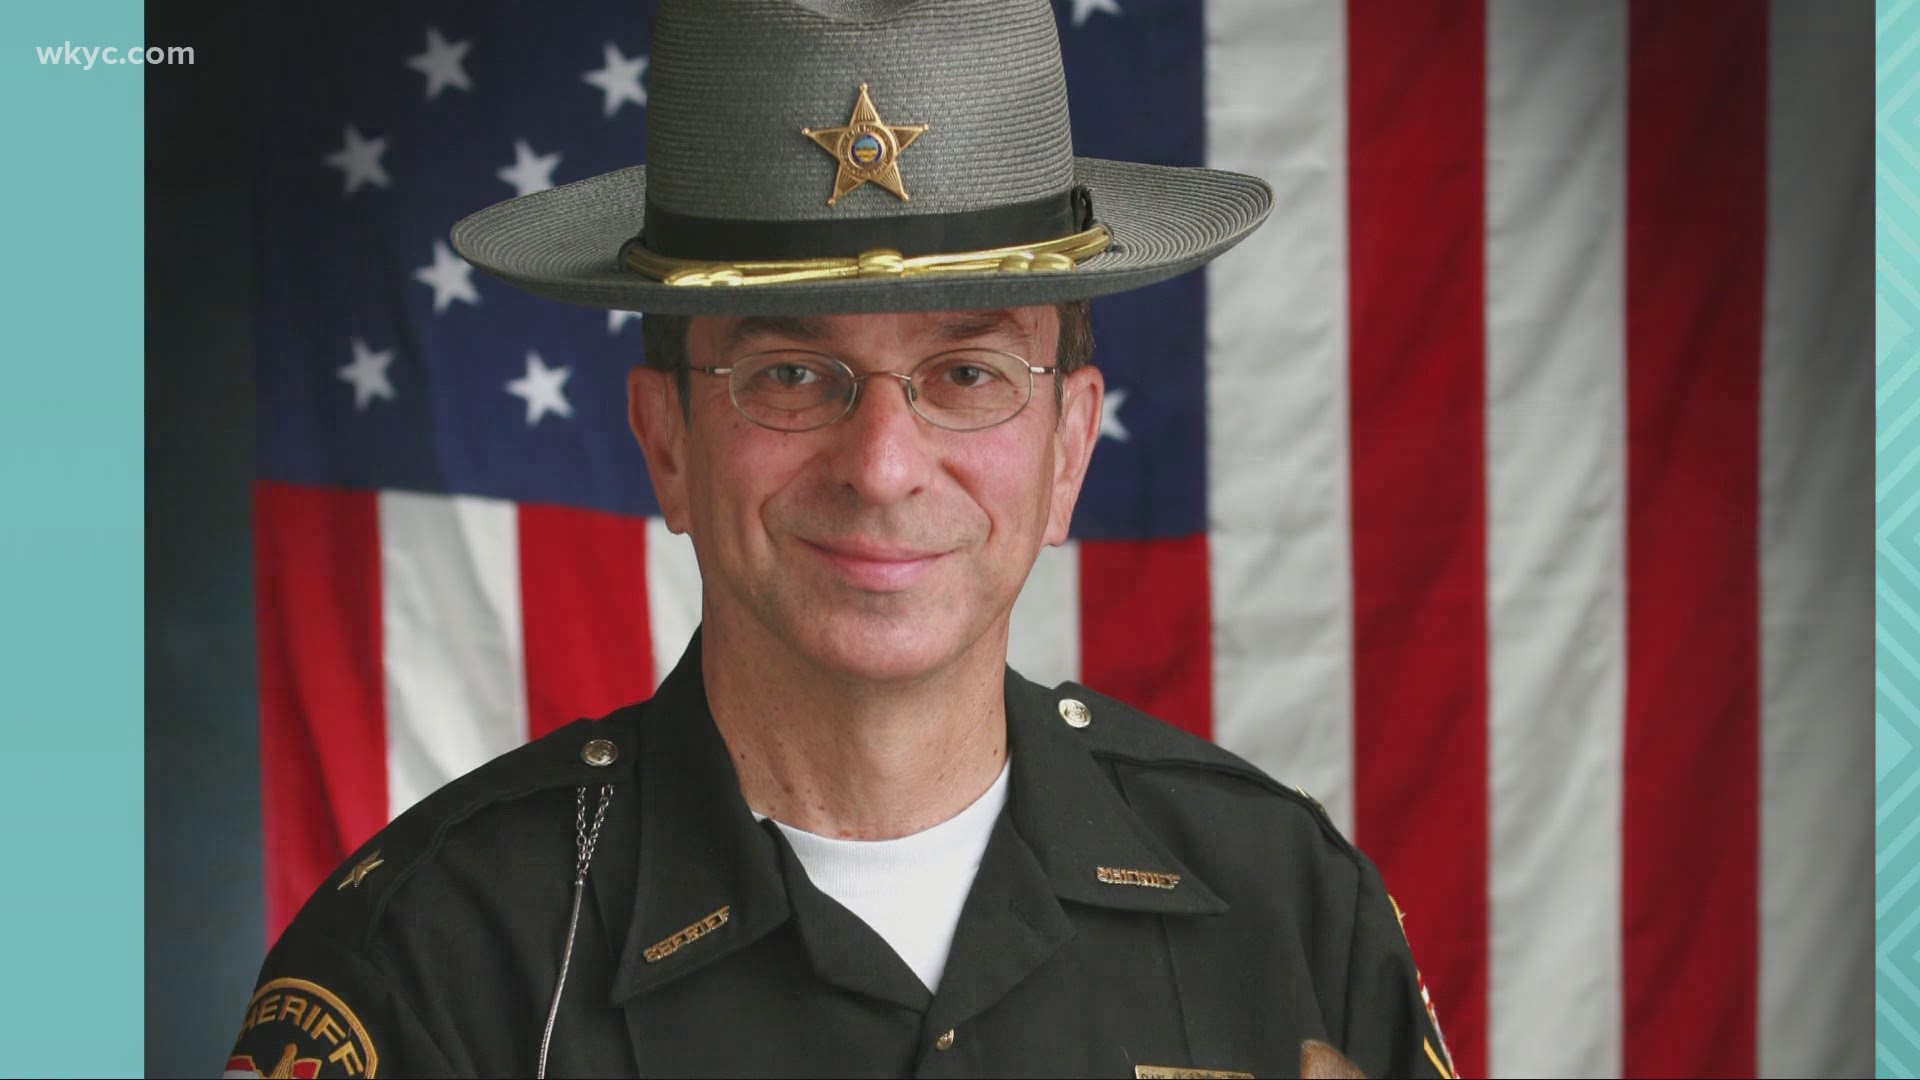 Retired Geauga County Sheriff Dan McClelland has died.  He served the residents of Geauga County for 44 years with the last 13 years serving as Sheriff.